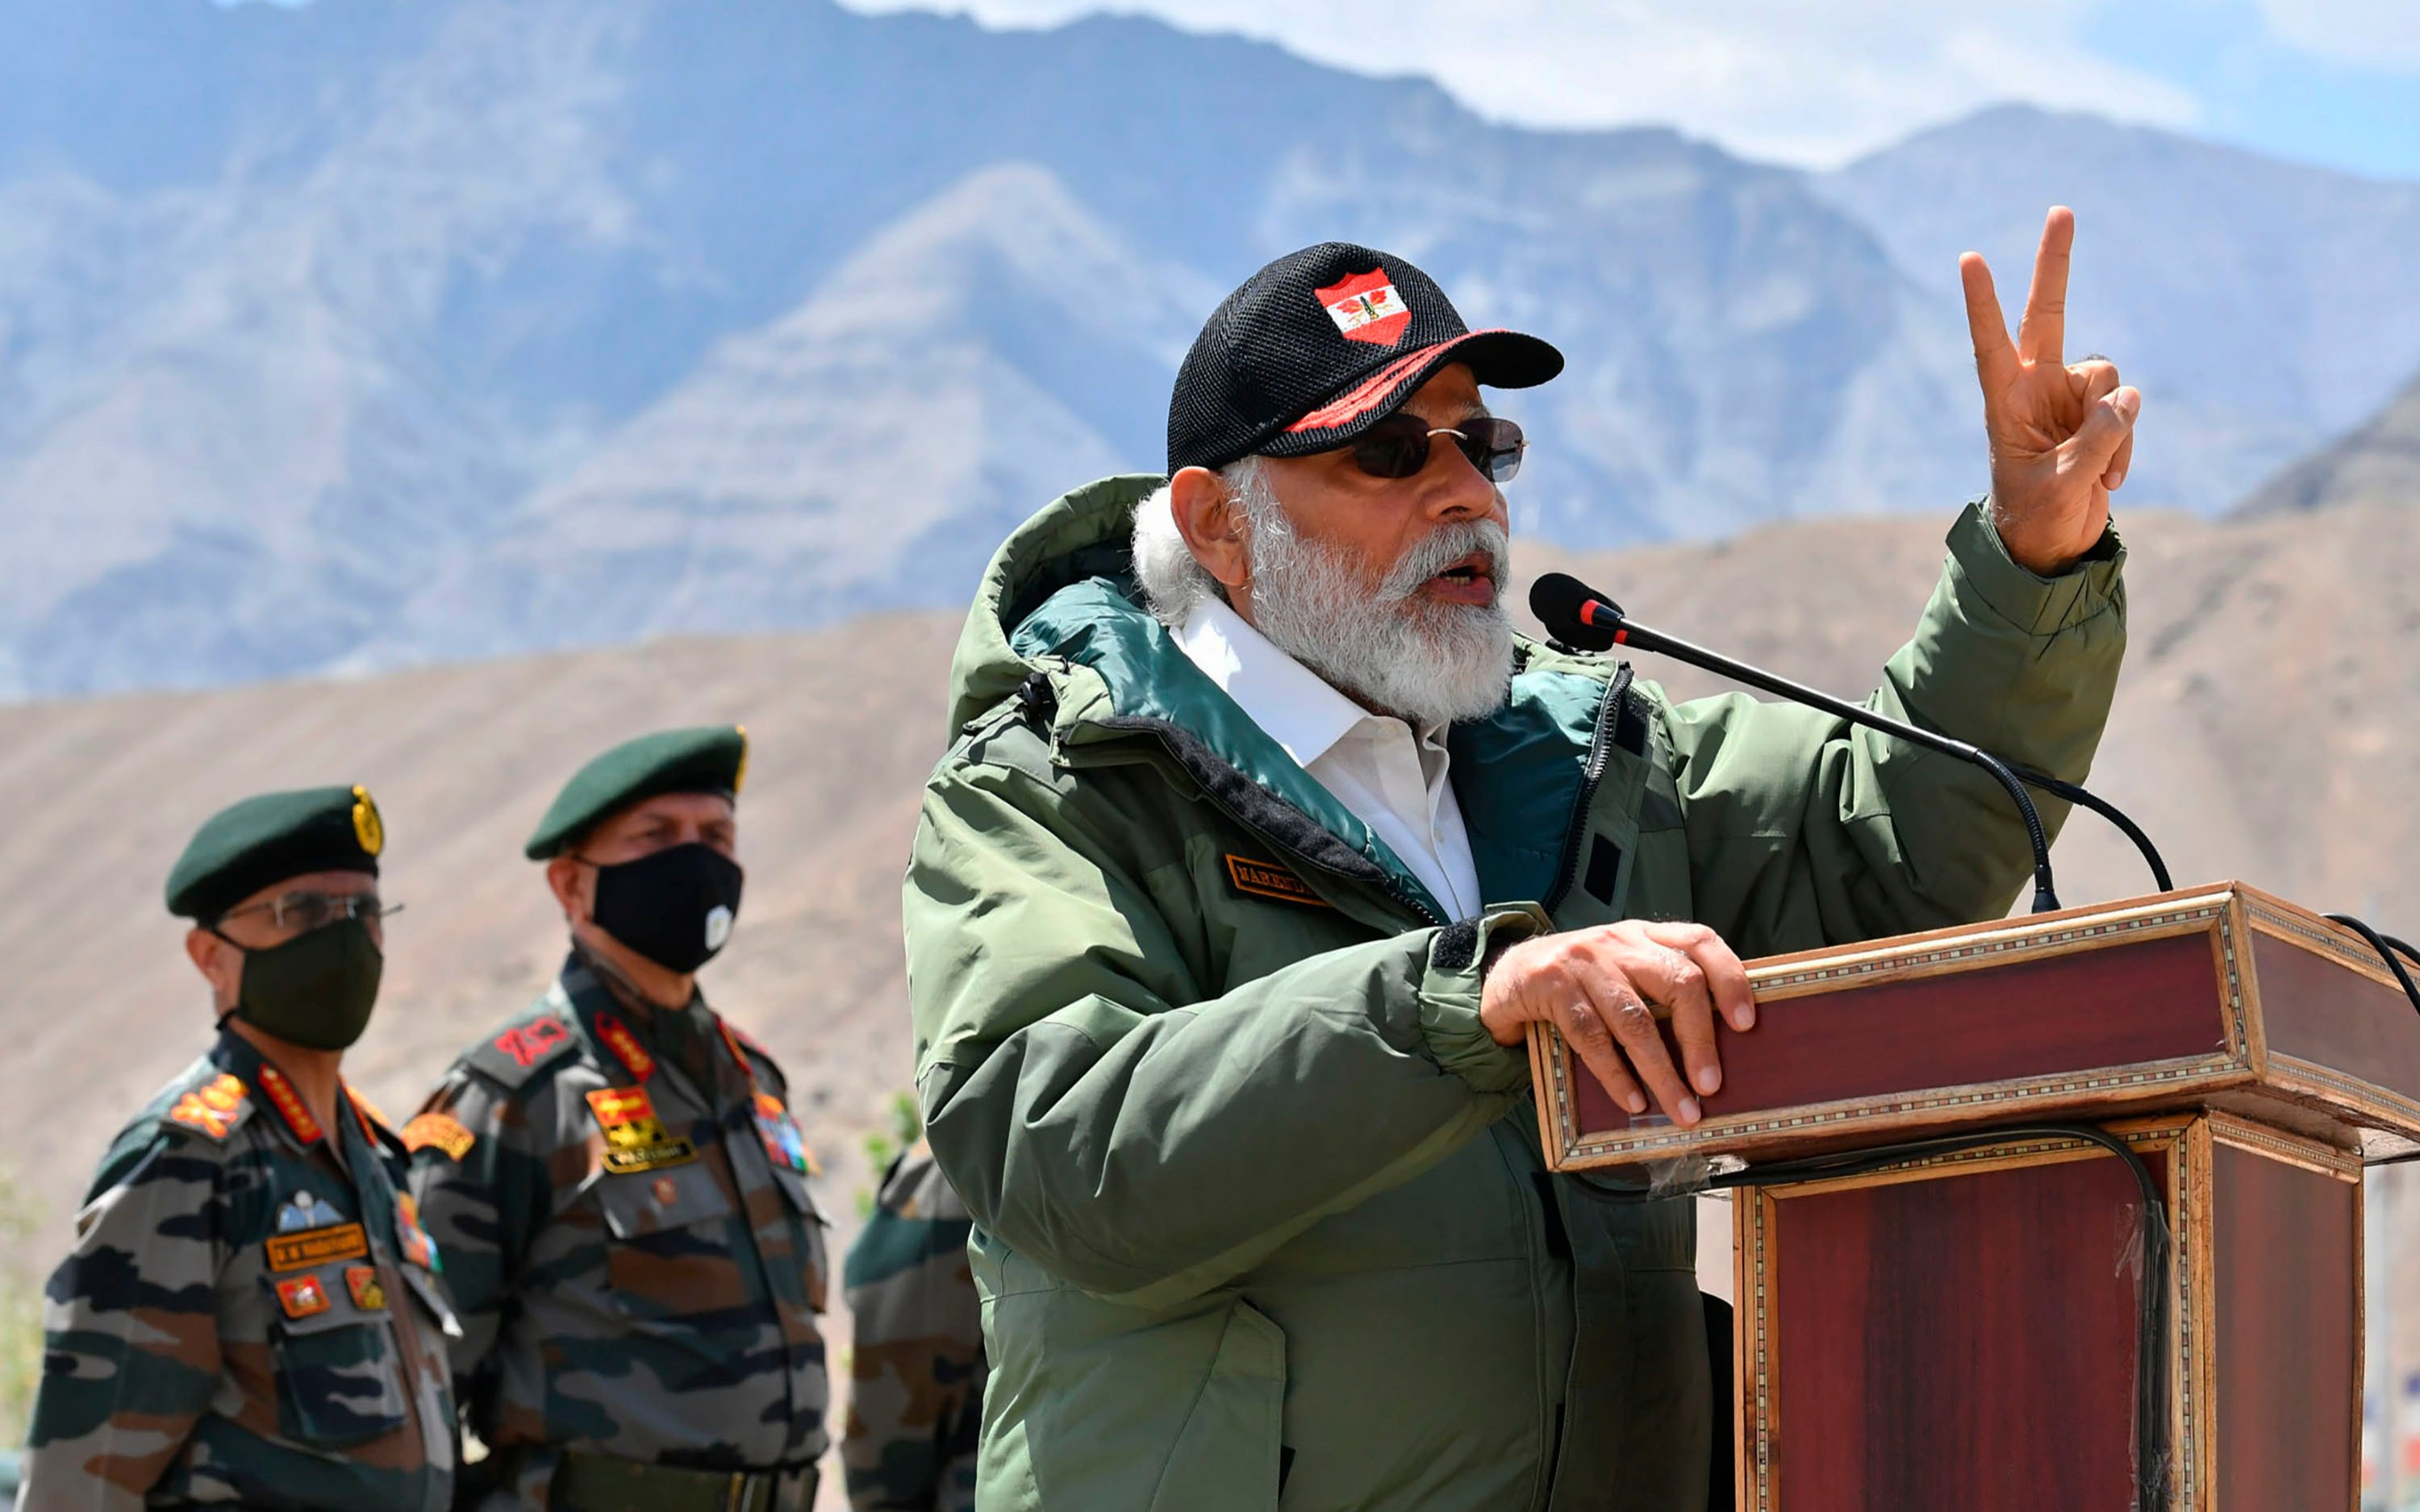 PM Modi's clear message to China from Ladakh: Age of expansionism over,  this is age of development - IBTimes India